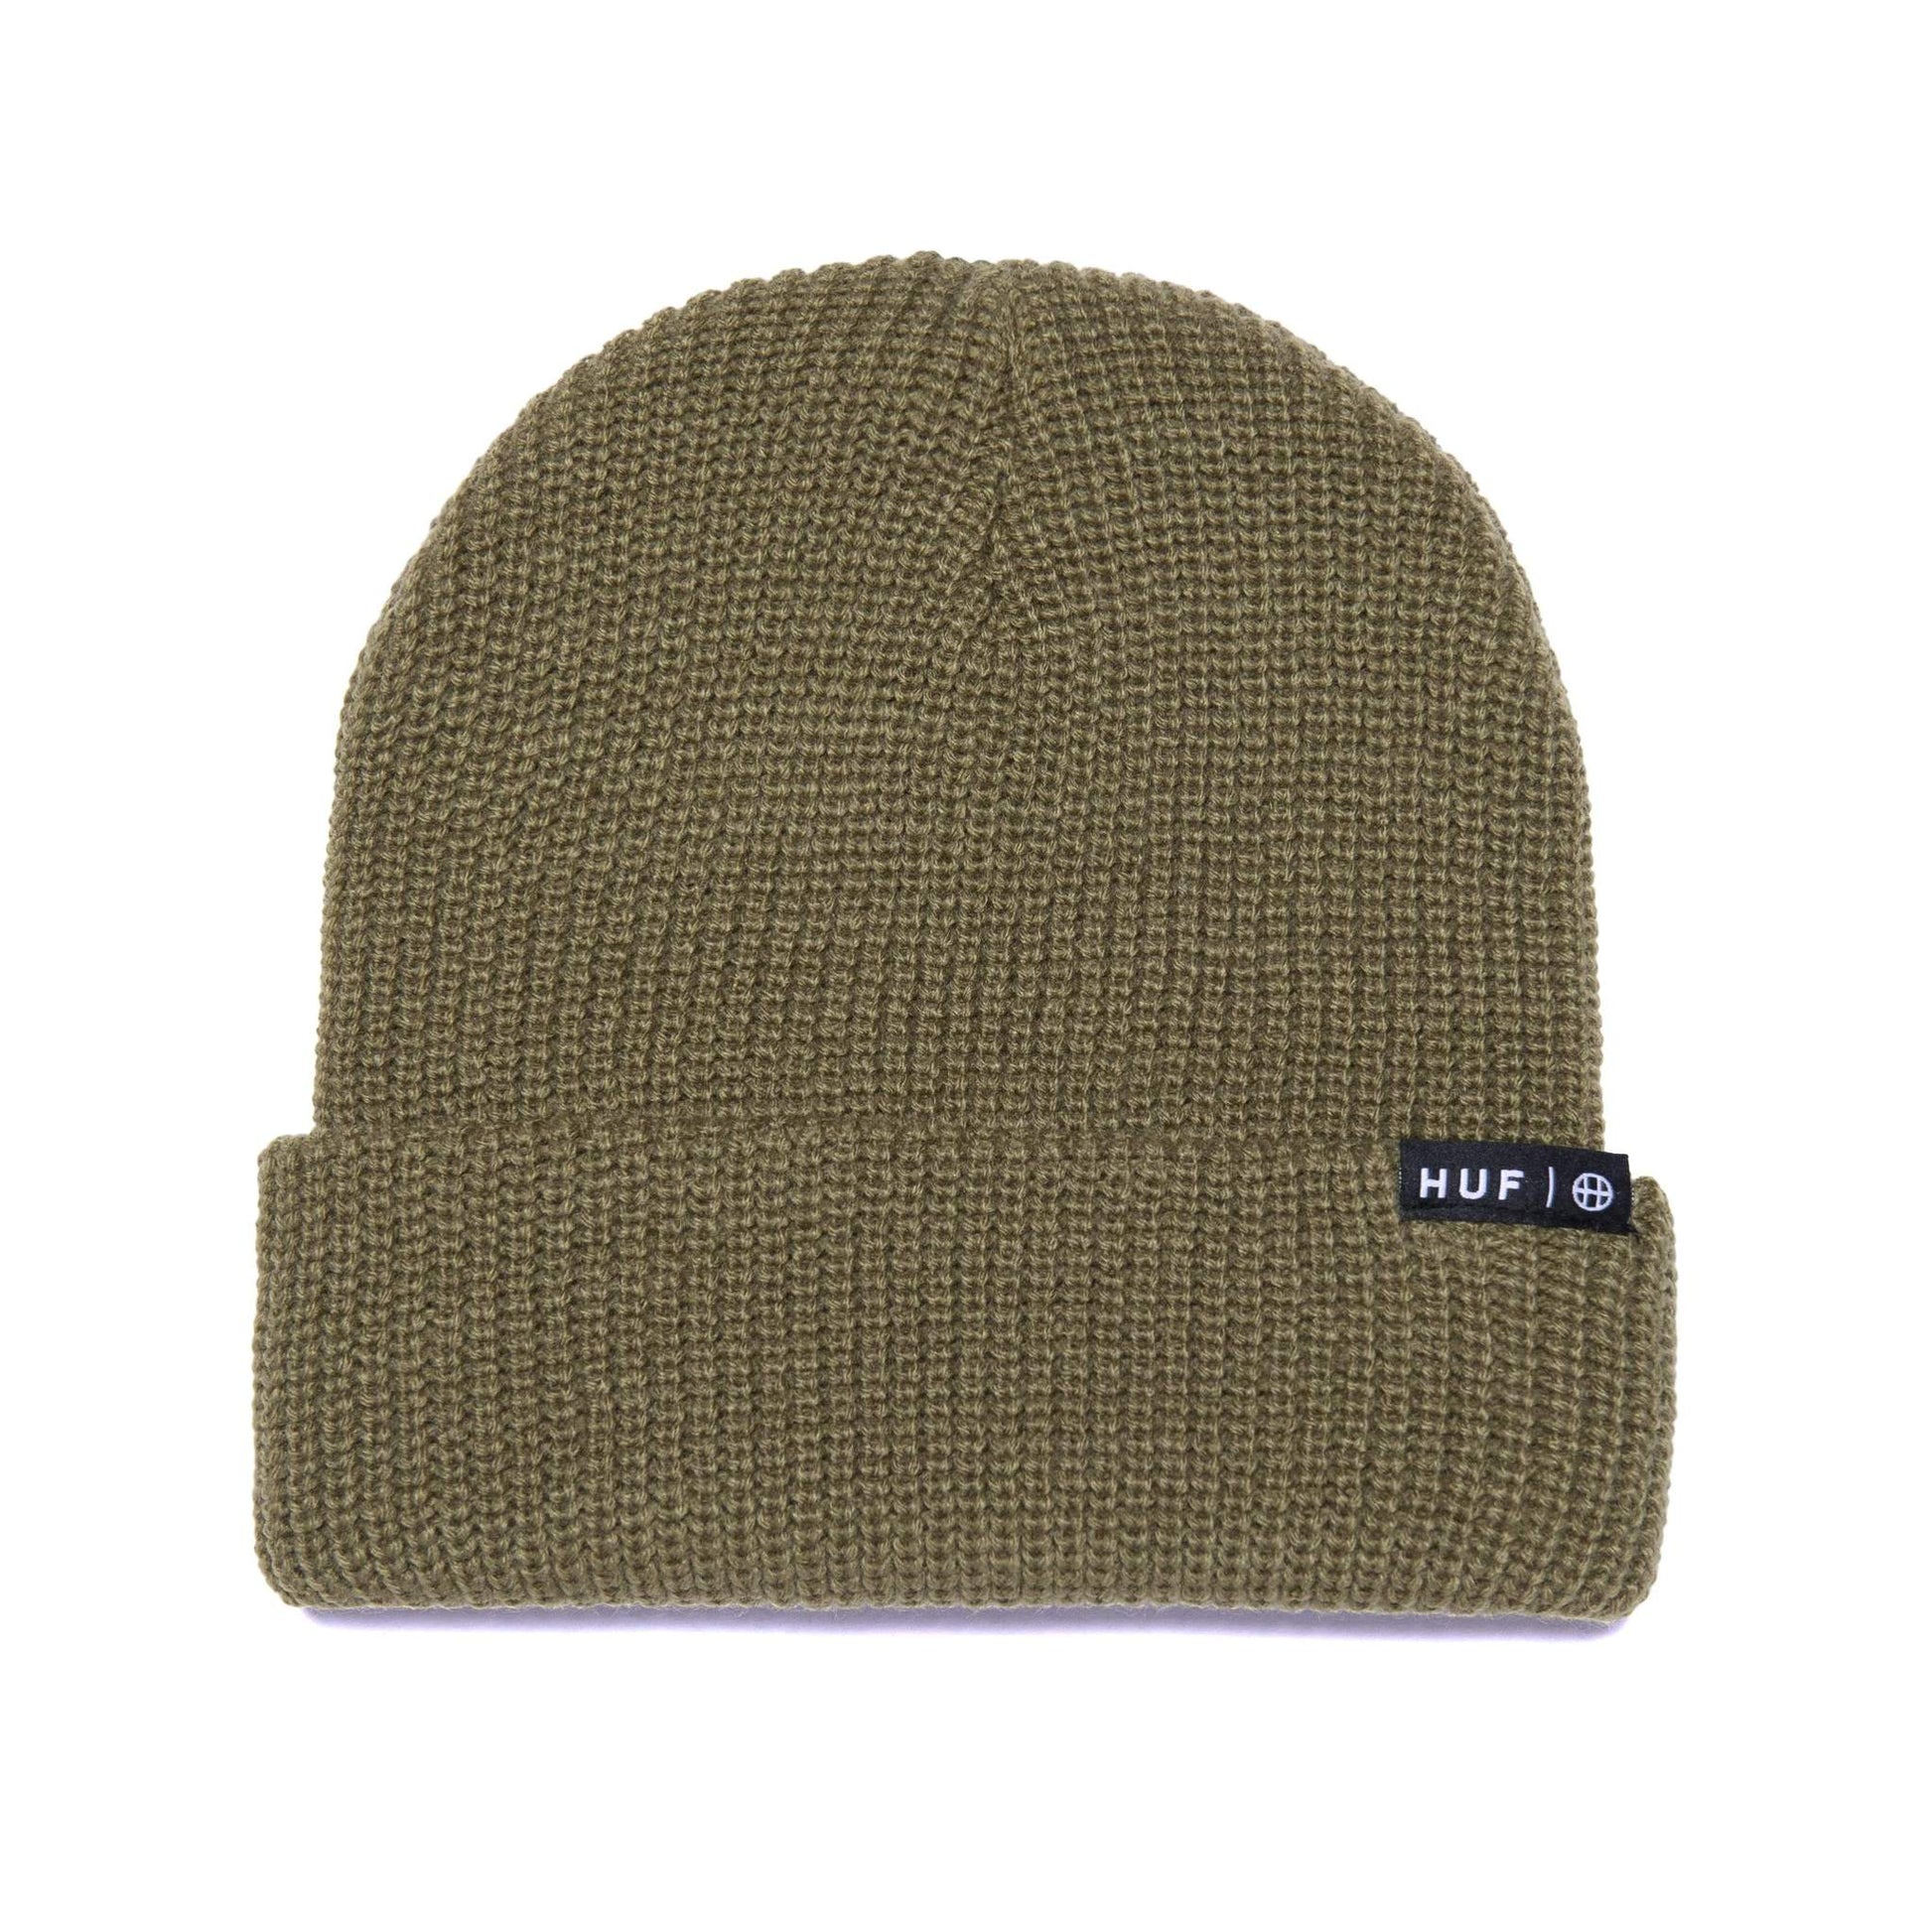 HUF ESSENTIALS USUAL BEANIE - OLIVE freeshipping - FREESTYLE LLORET